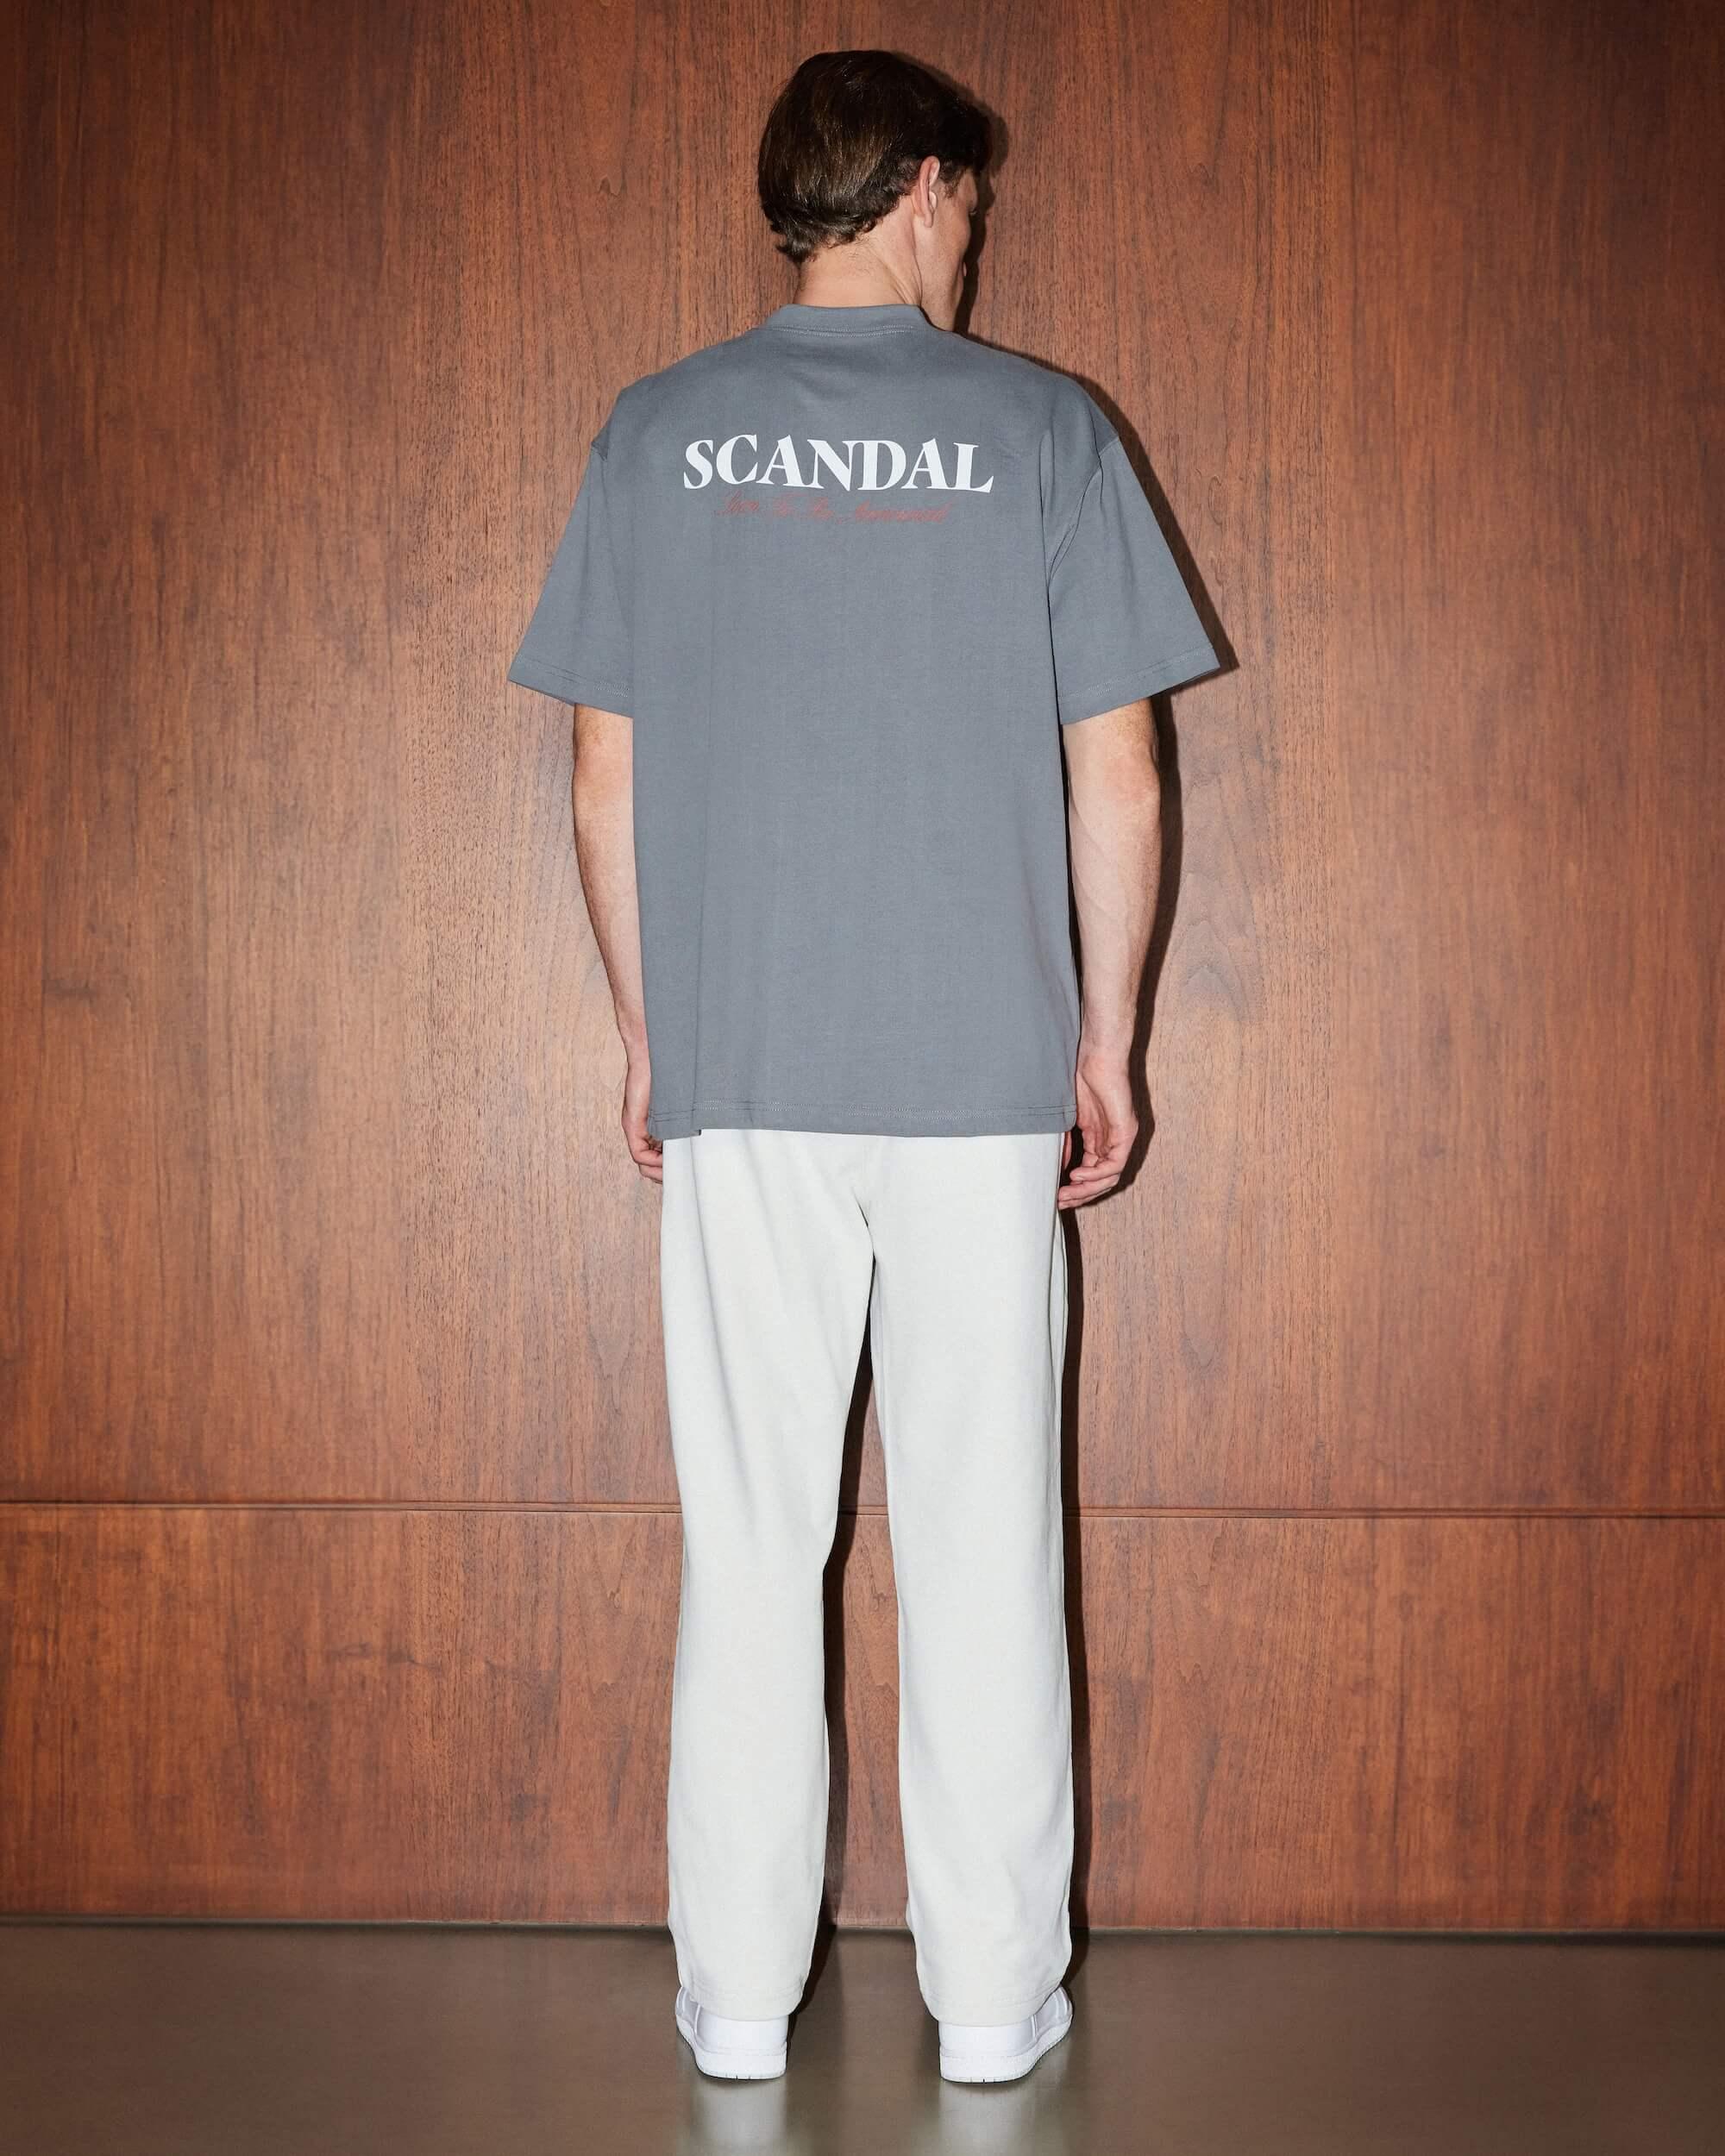 Scandal T-Shirt - SOON TO BE ANNOUNCED